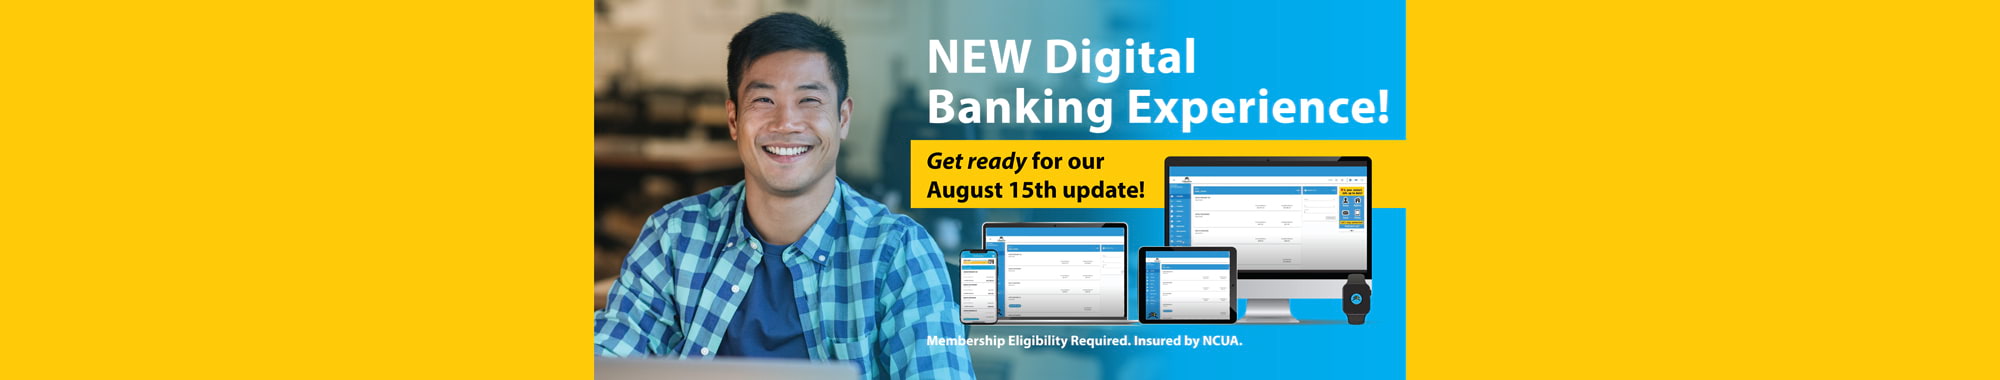 NEW Digital Banking Experience! Get ready for our August 15th Update.